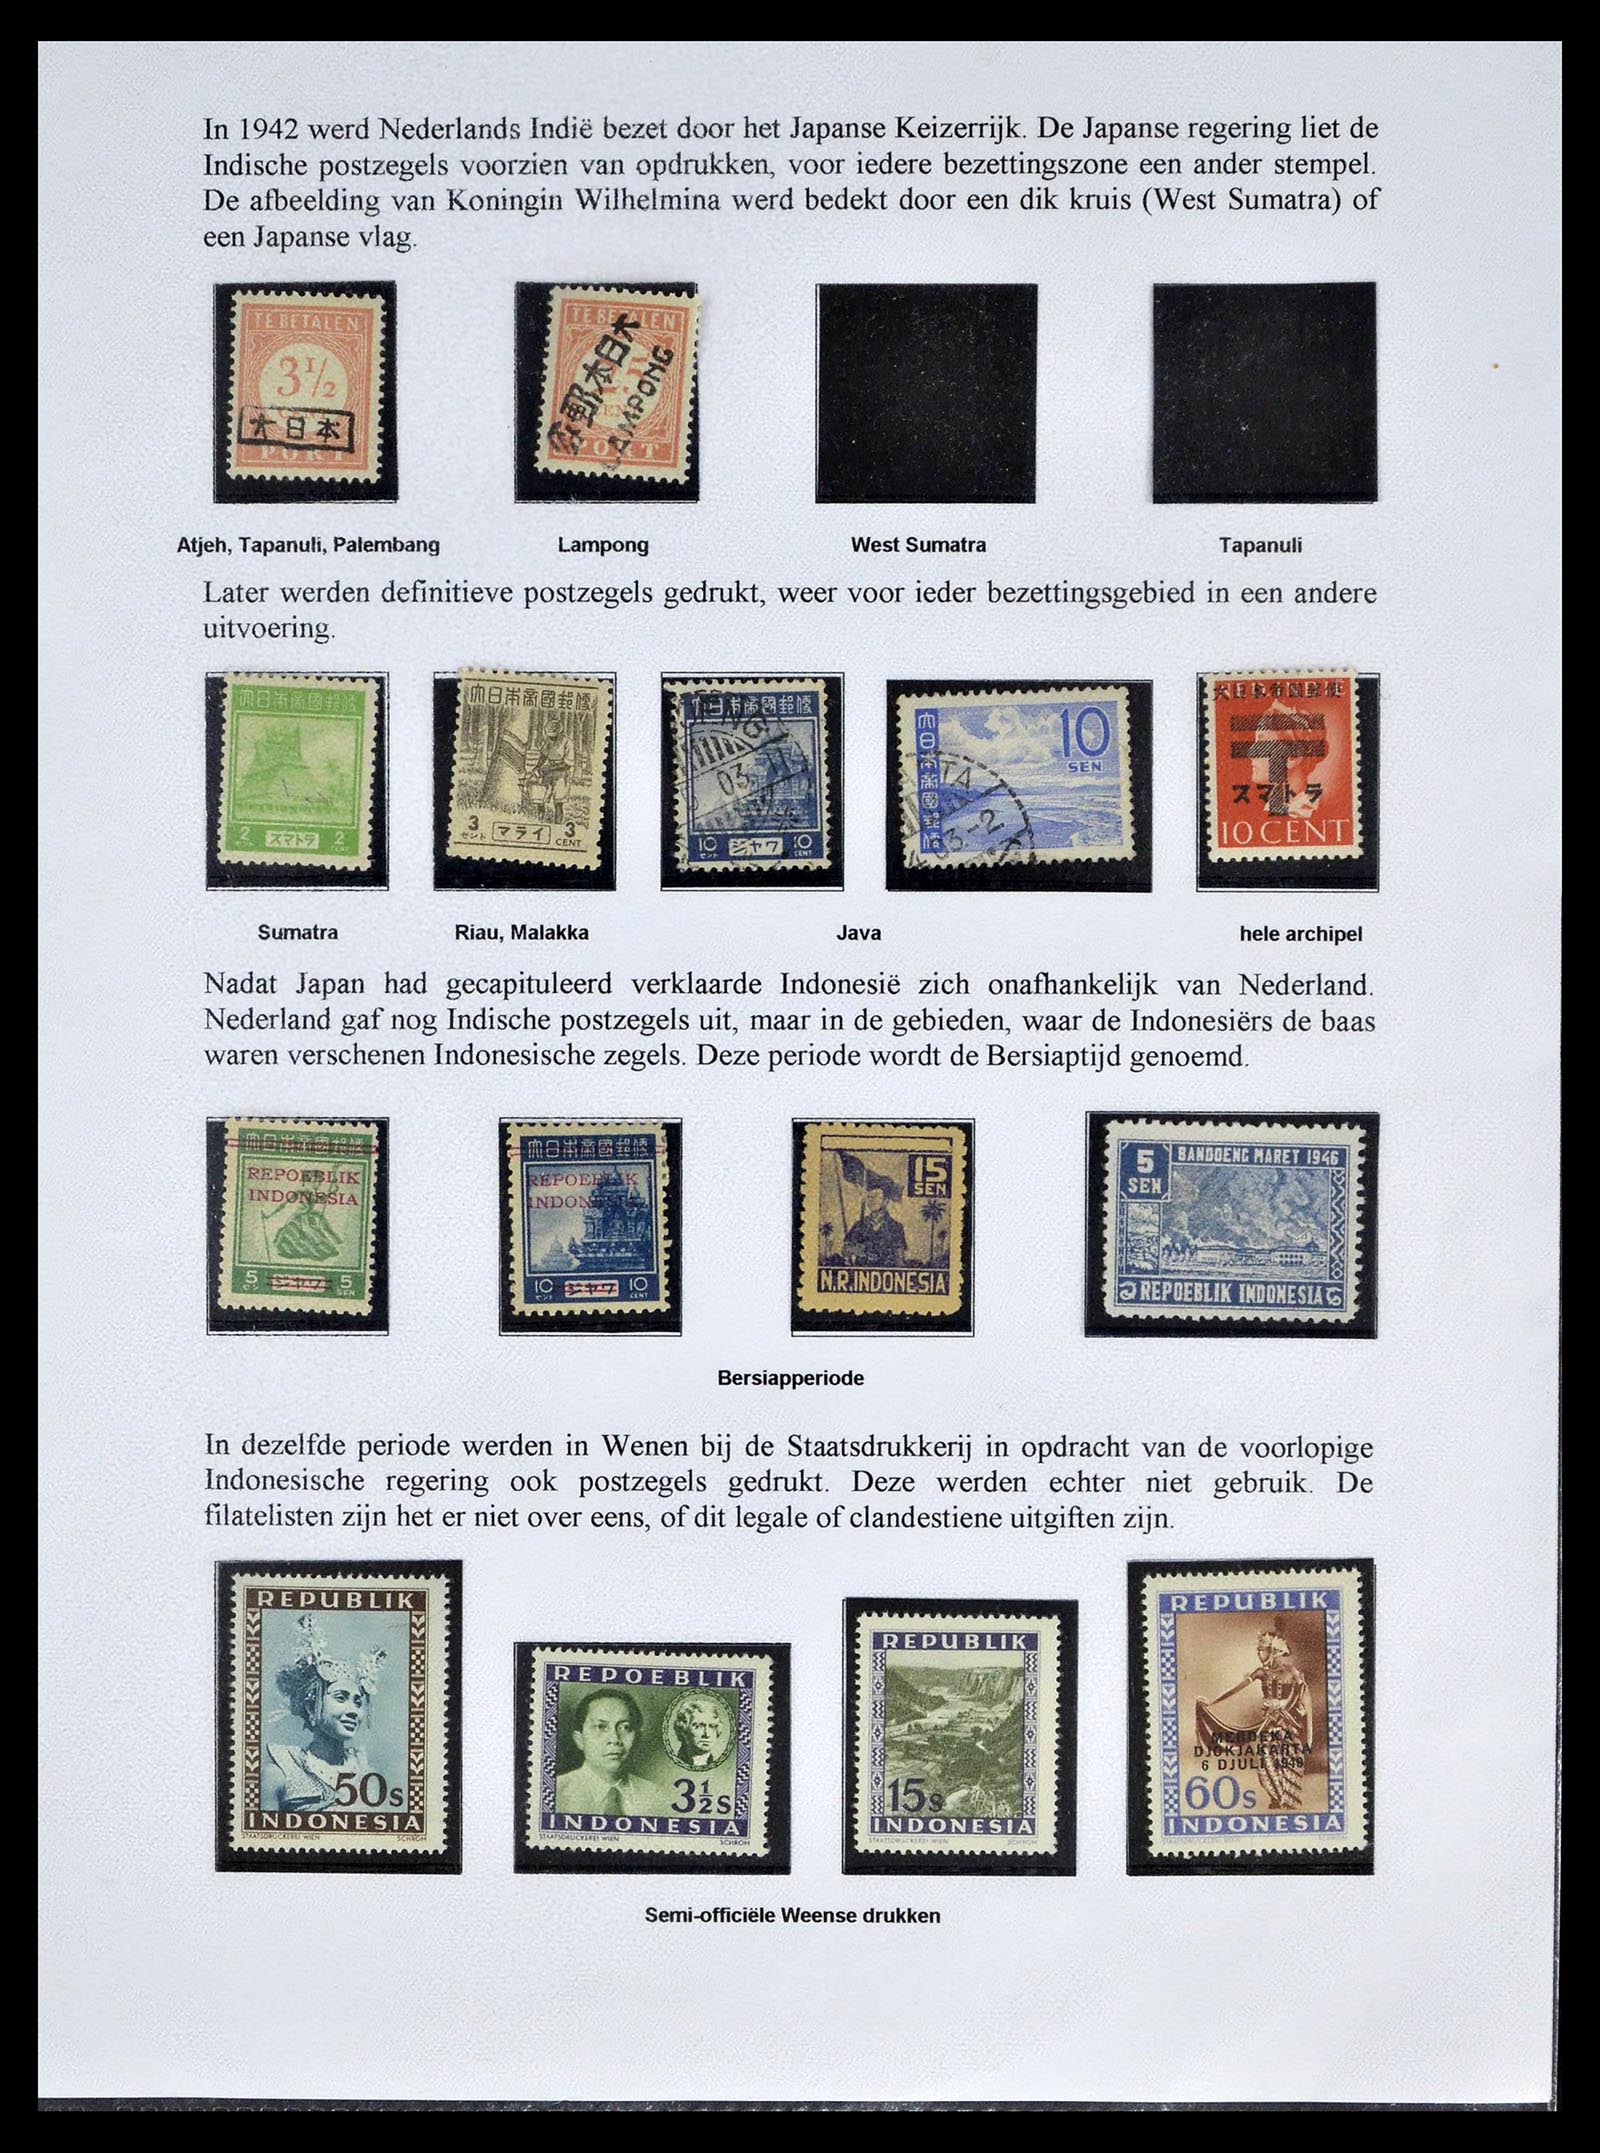 39026 0082 - Stamp collection 39026 Dutch east Indies and Suriname 1864-1975.